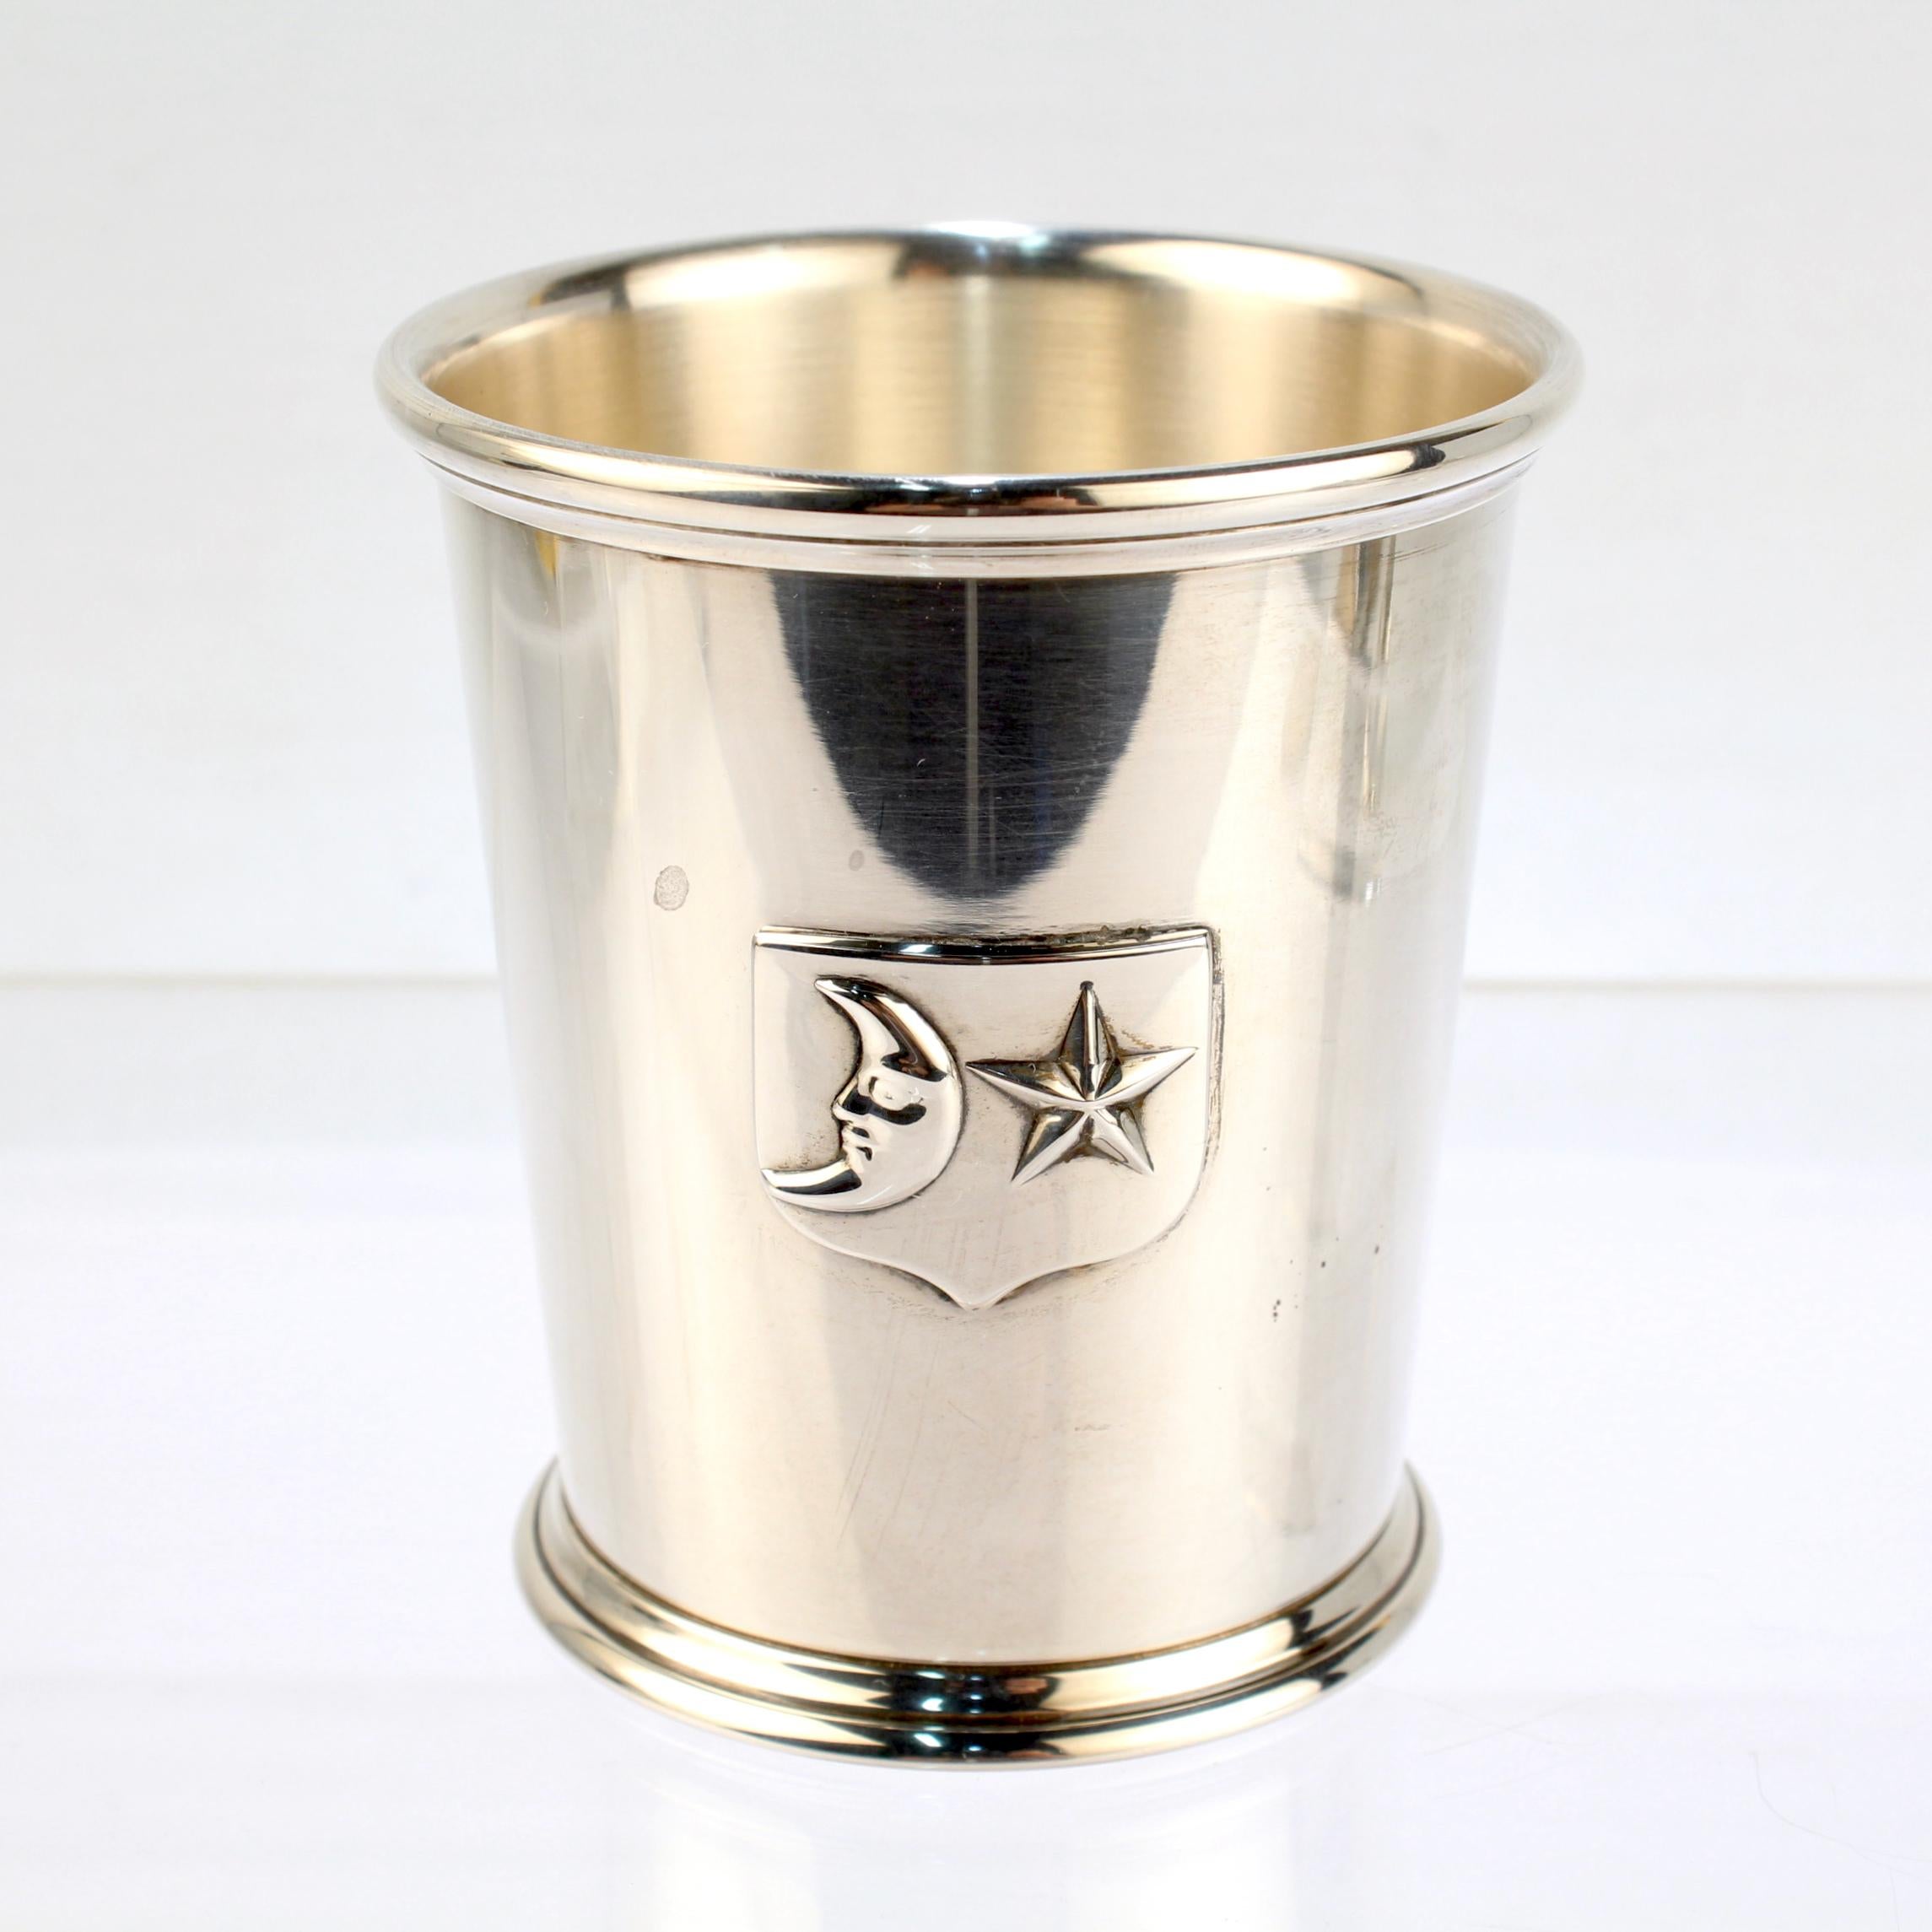 A fine sterling silver mint julep cup or tumbler.

By Barry Kieselstein-Cord.

With an applied shield with a crescent moon and star symbol (the Kieselstein-Cord mark).

Simply a wonderful mint julep cup!

Date:
20th Century

Overall Condition:
It is